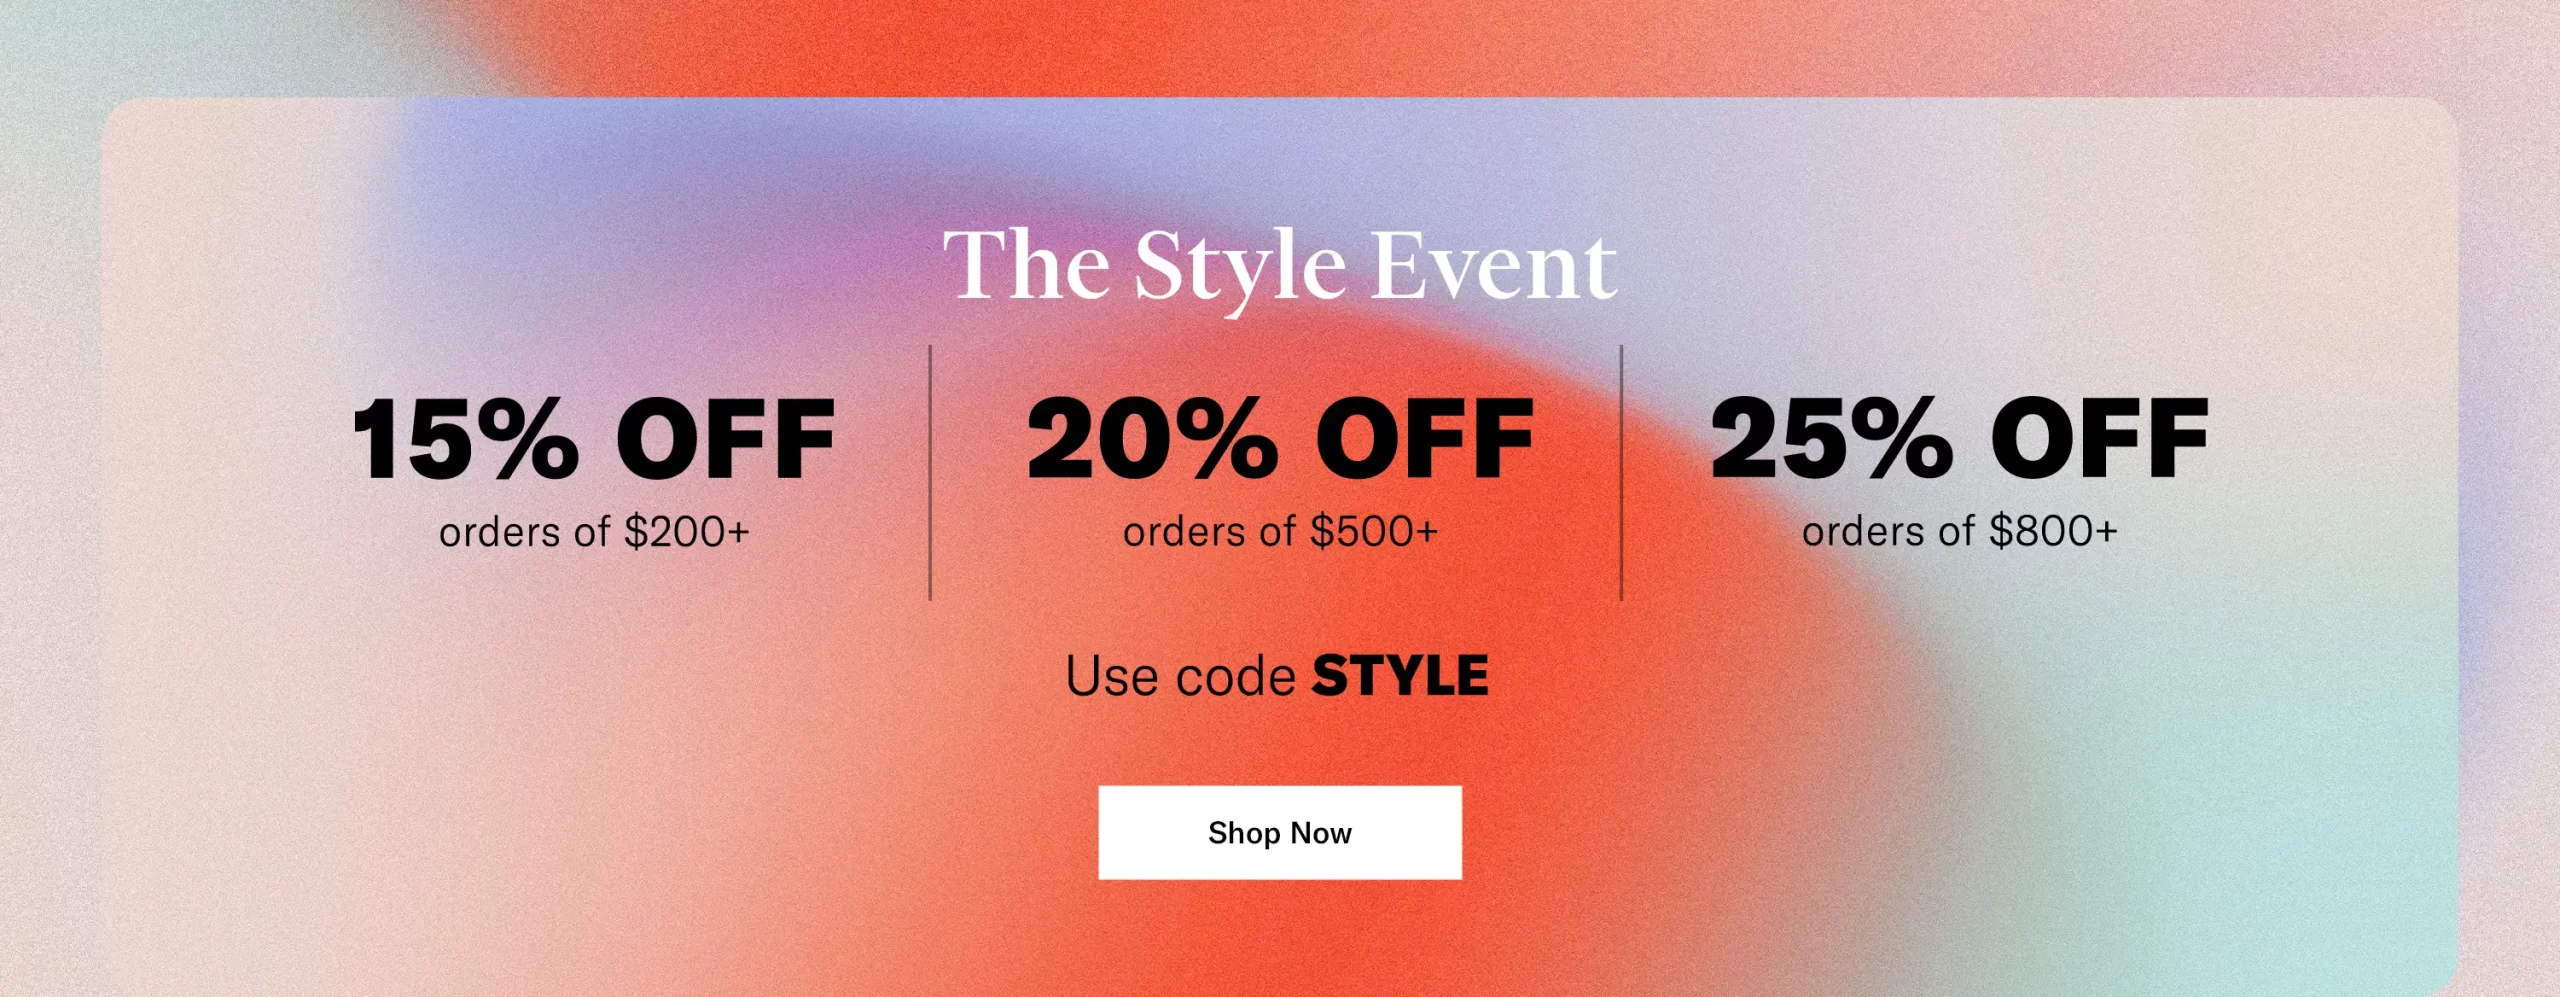 Shopbop Style Event fall sale 2021